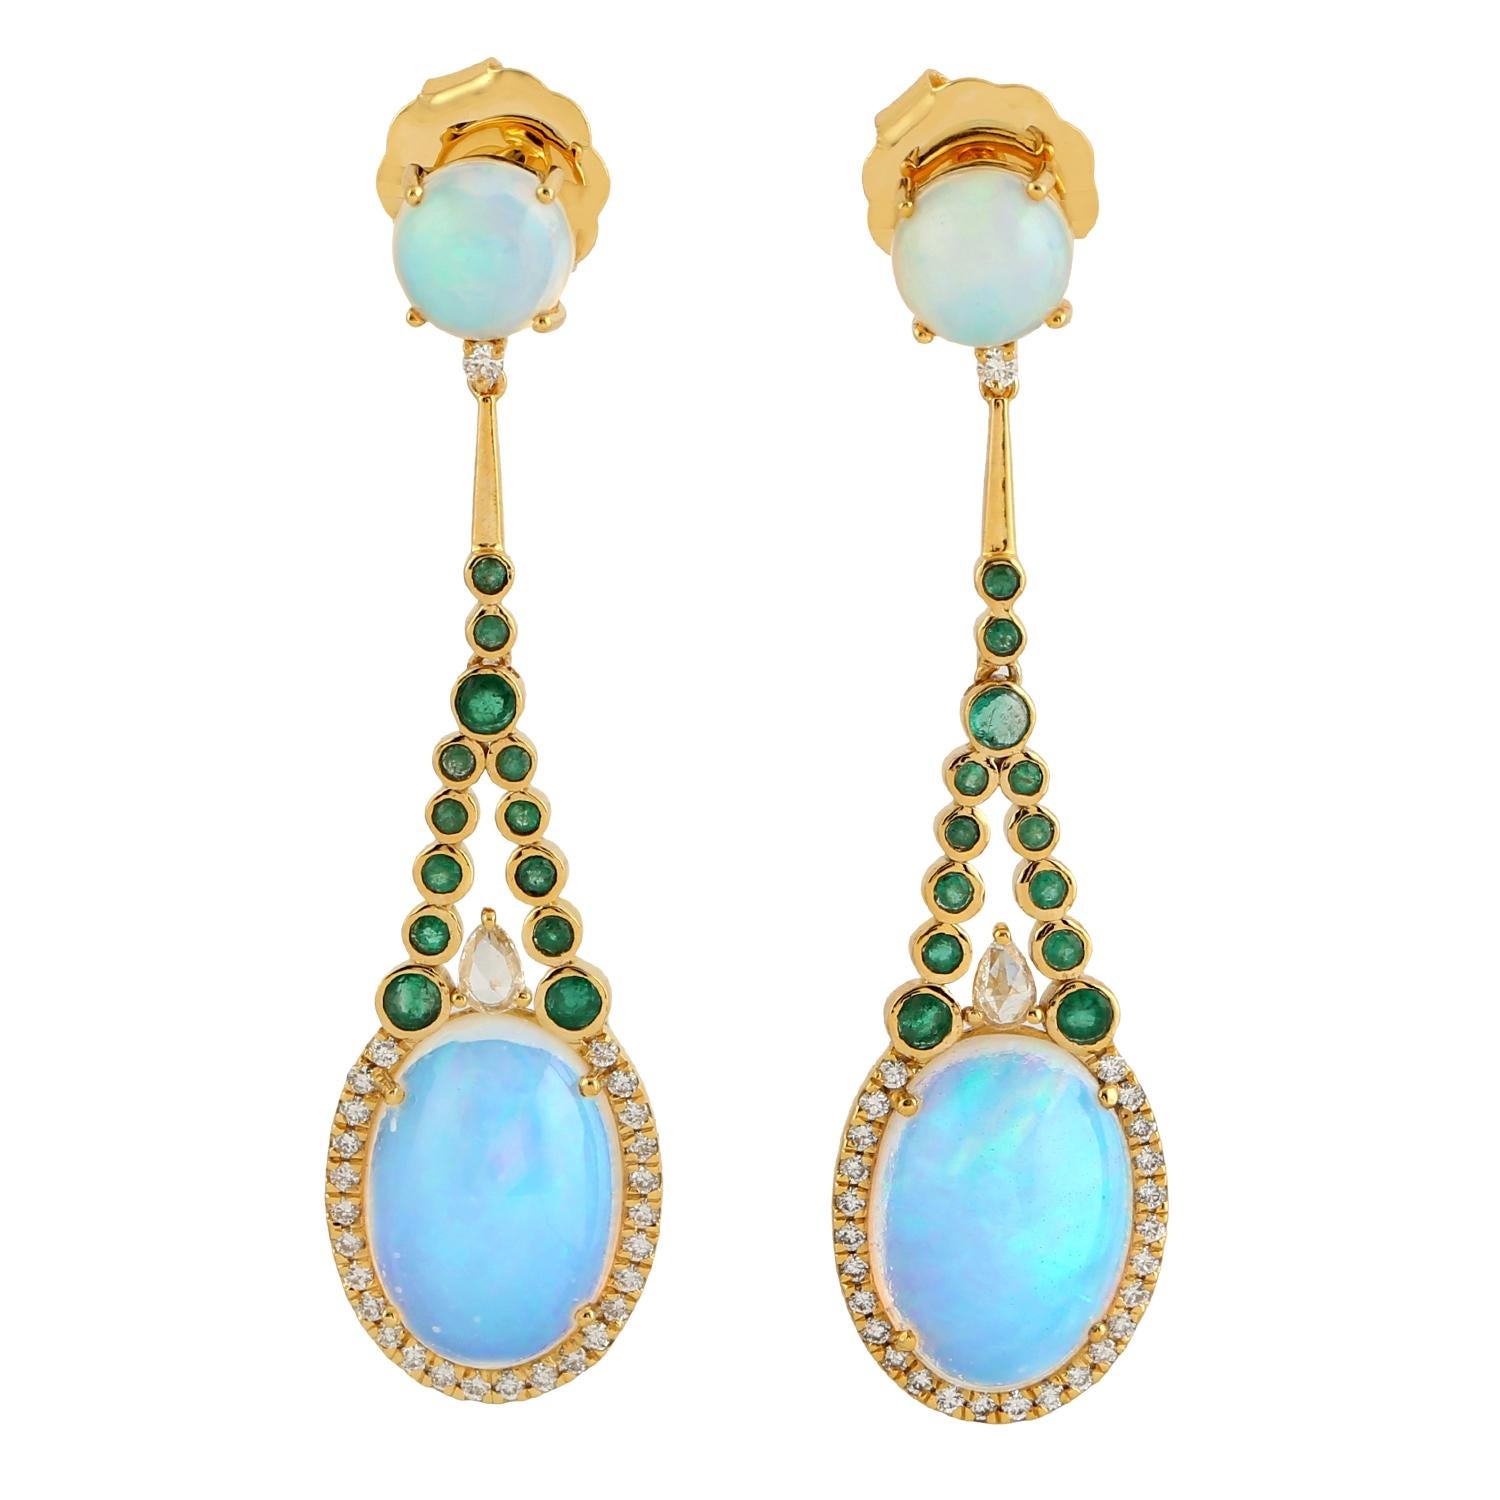 Mixed Cut Ethiopian Opal Dangle Earrings With Emerald & Diamonds Made In 18k Yellow Gold For Sale